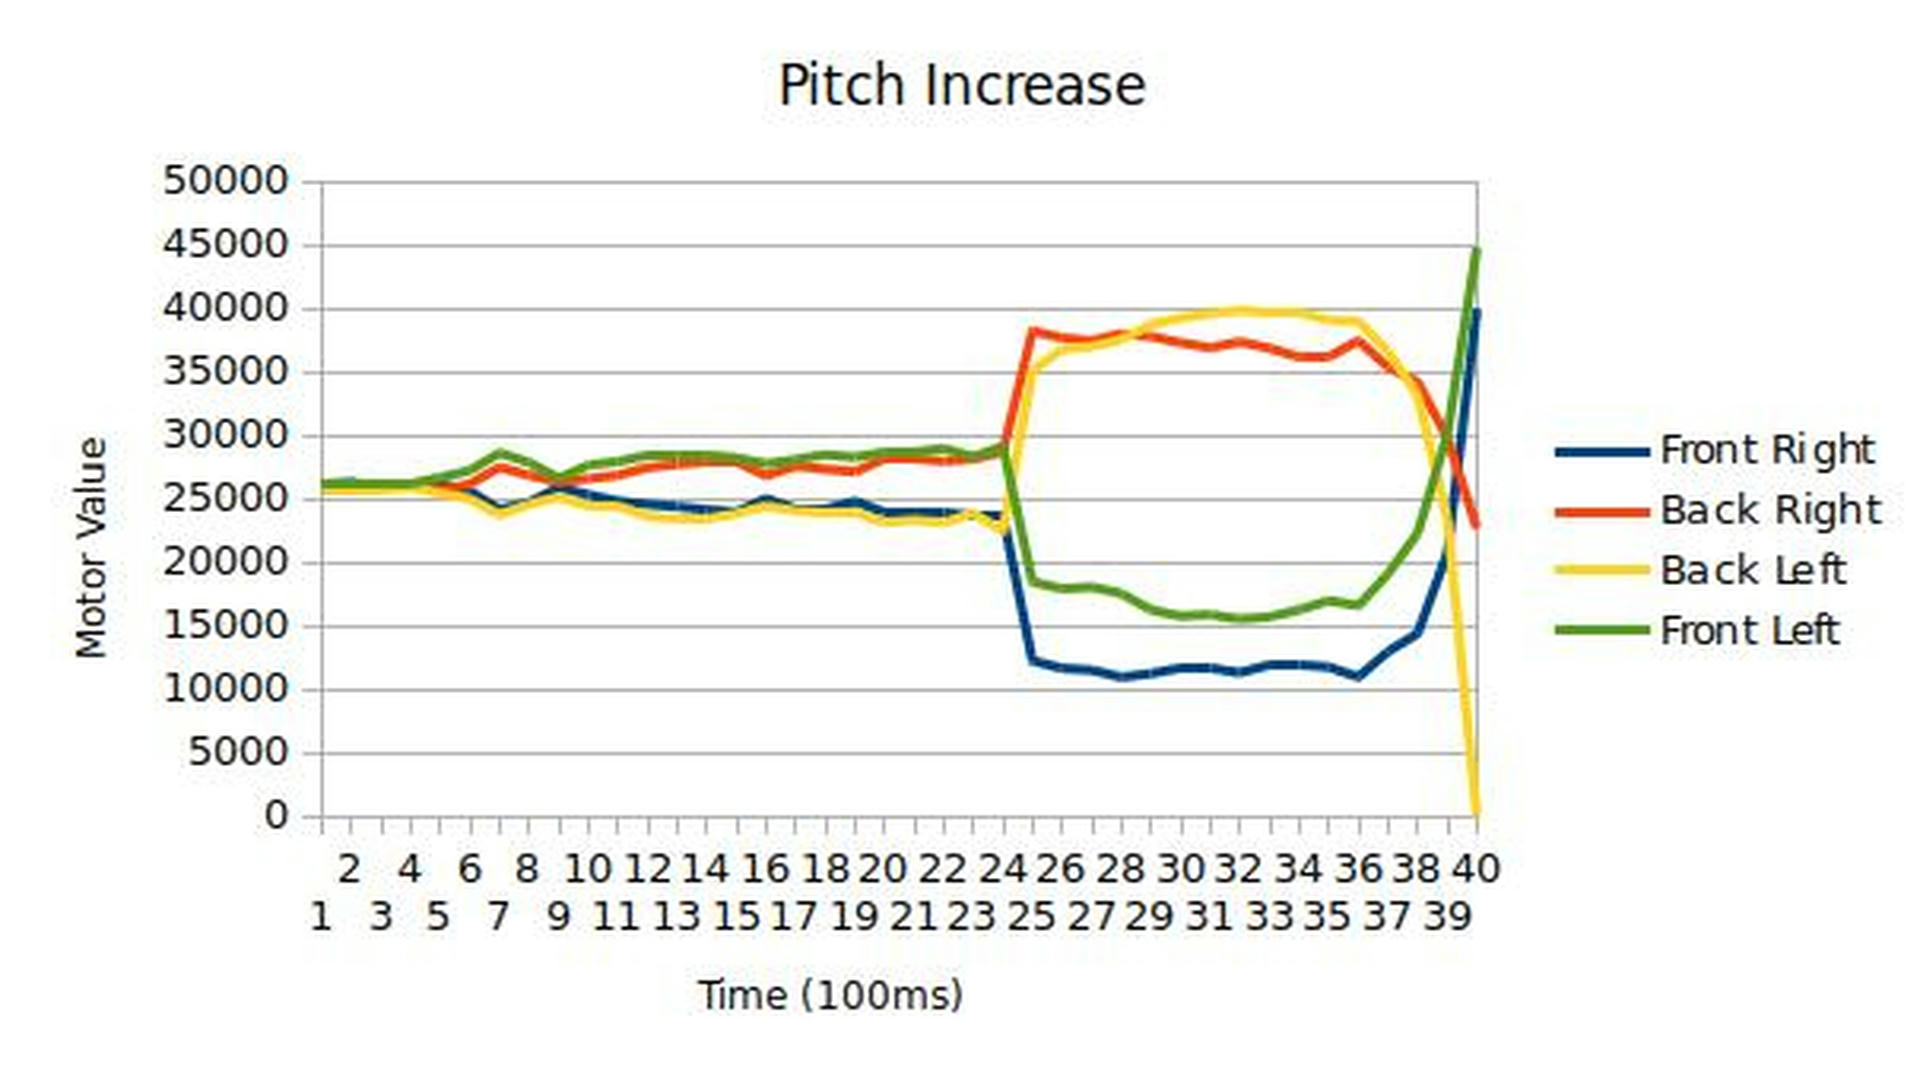 Pitch Increase